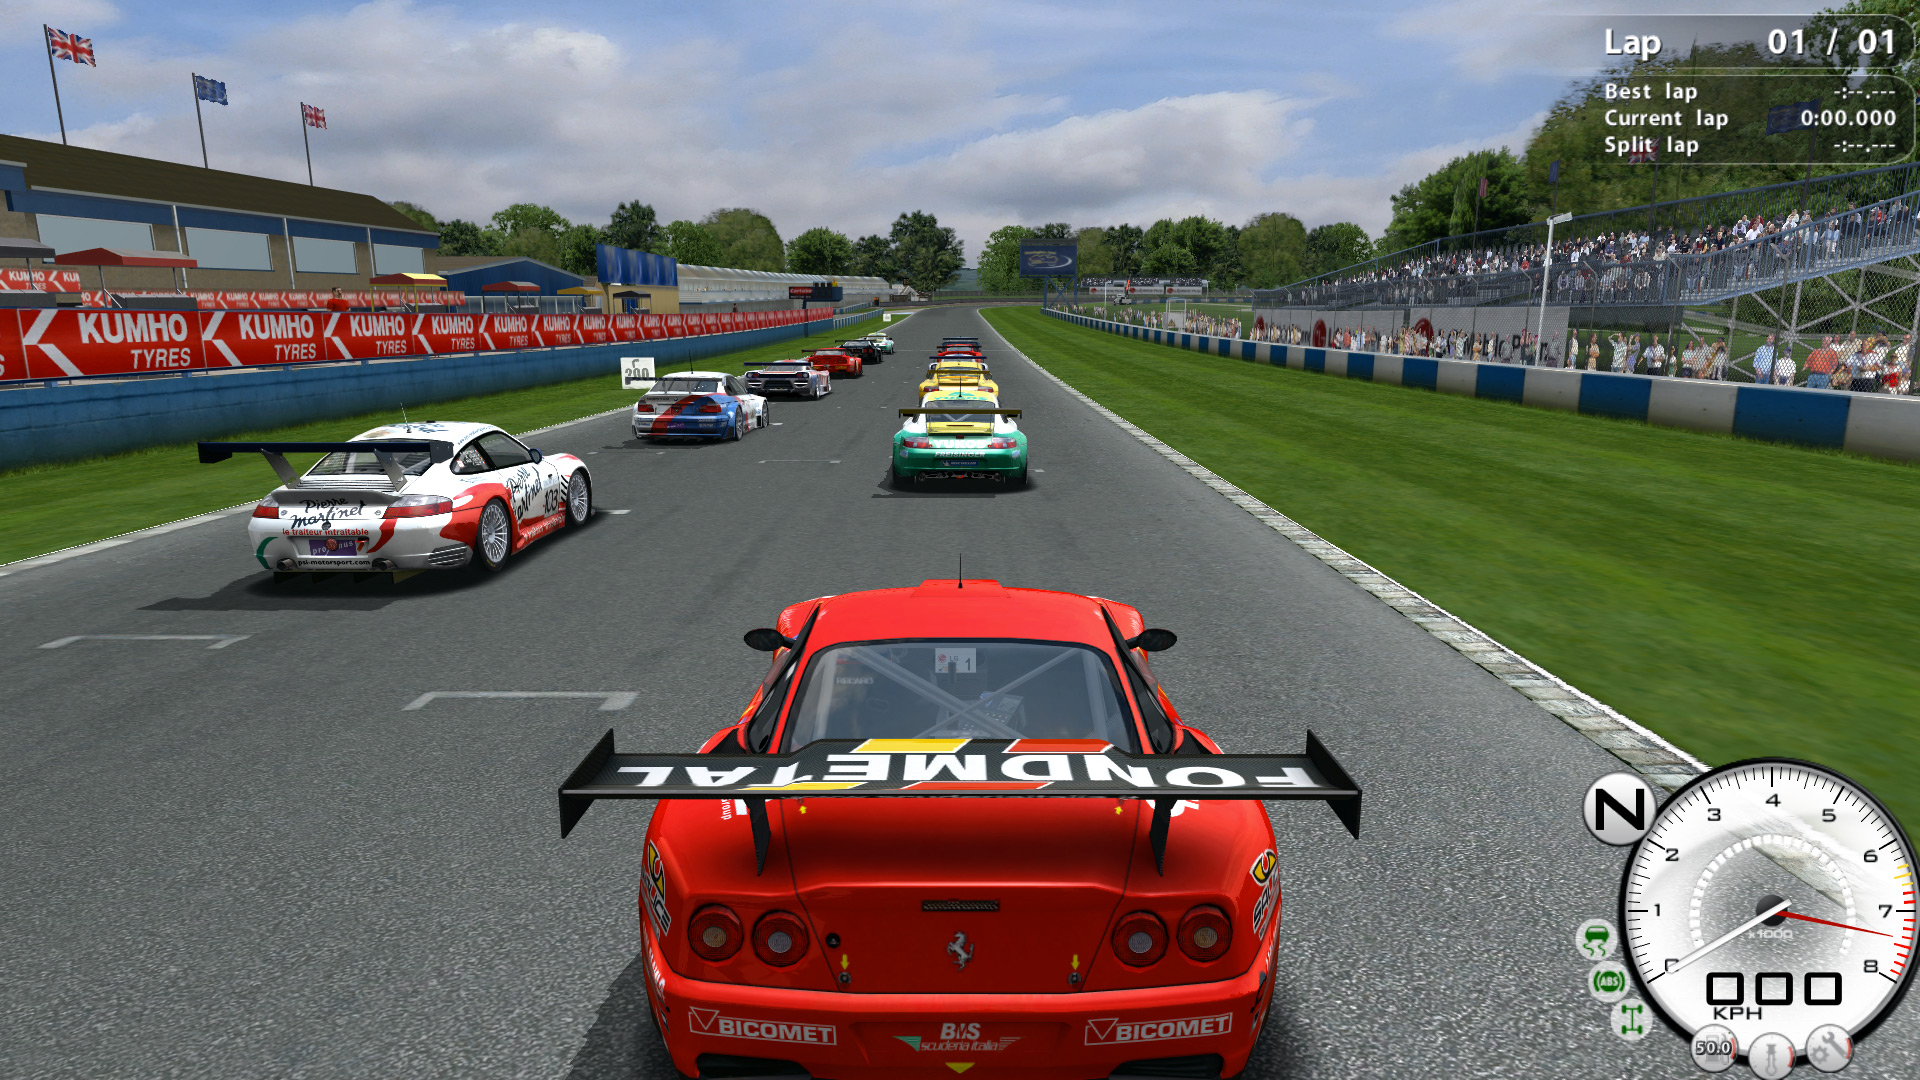 Donington-Graphic-and-Shaders-Playground-Reshade-LUT-different-HUD.jpg